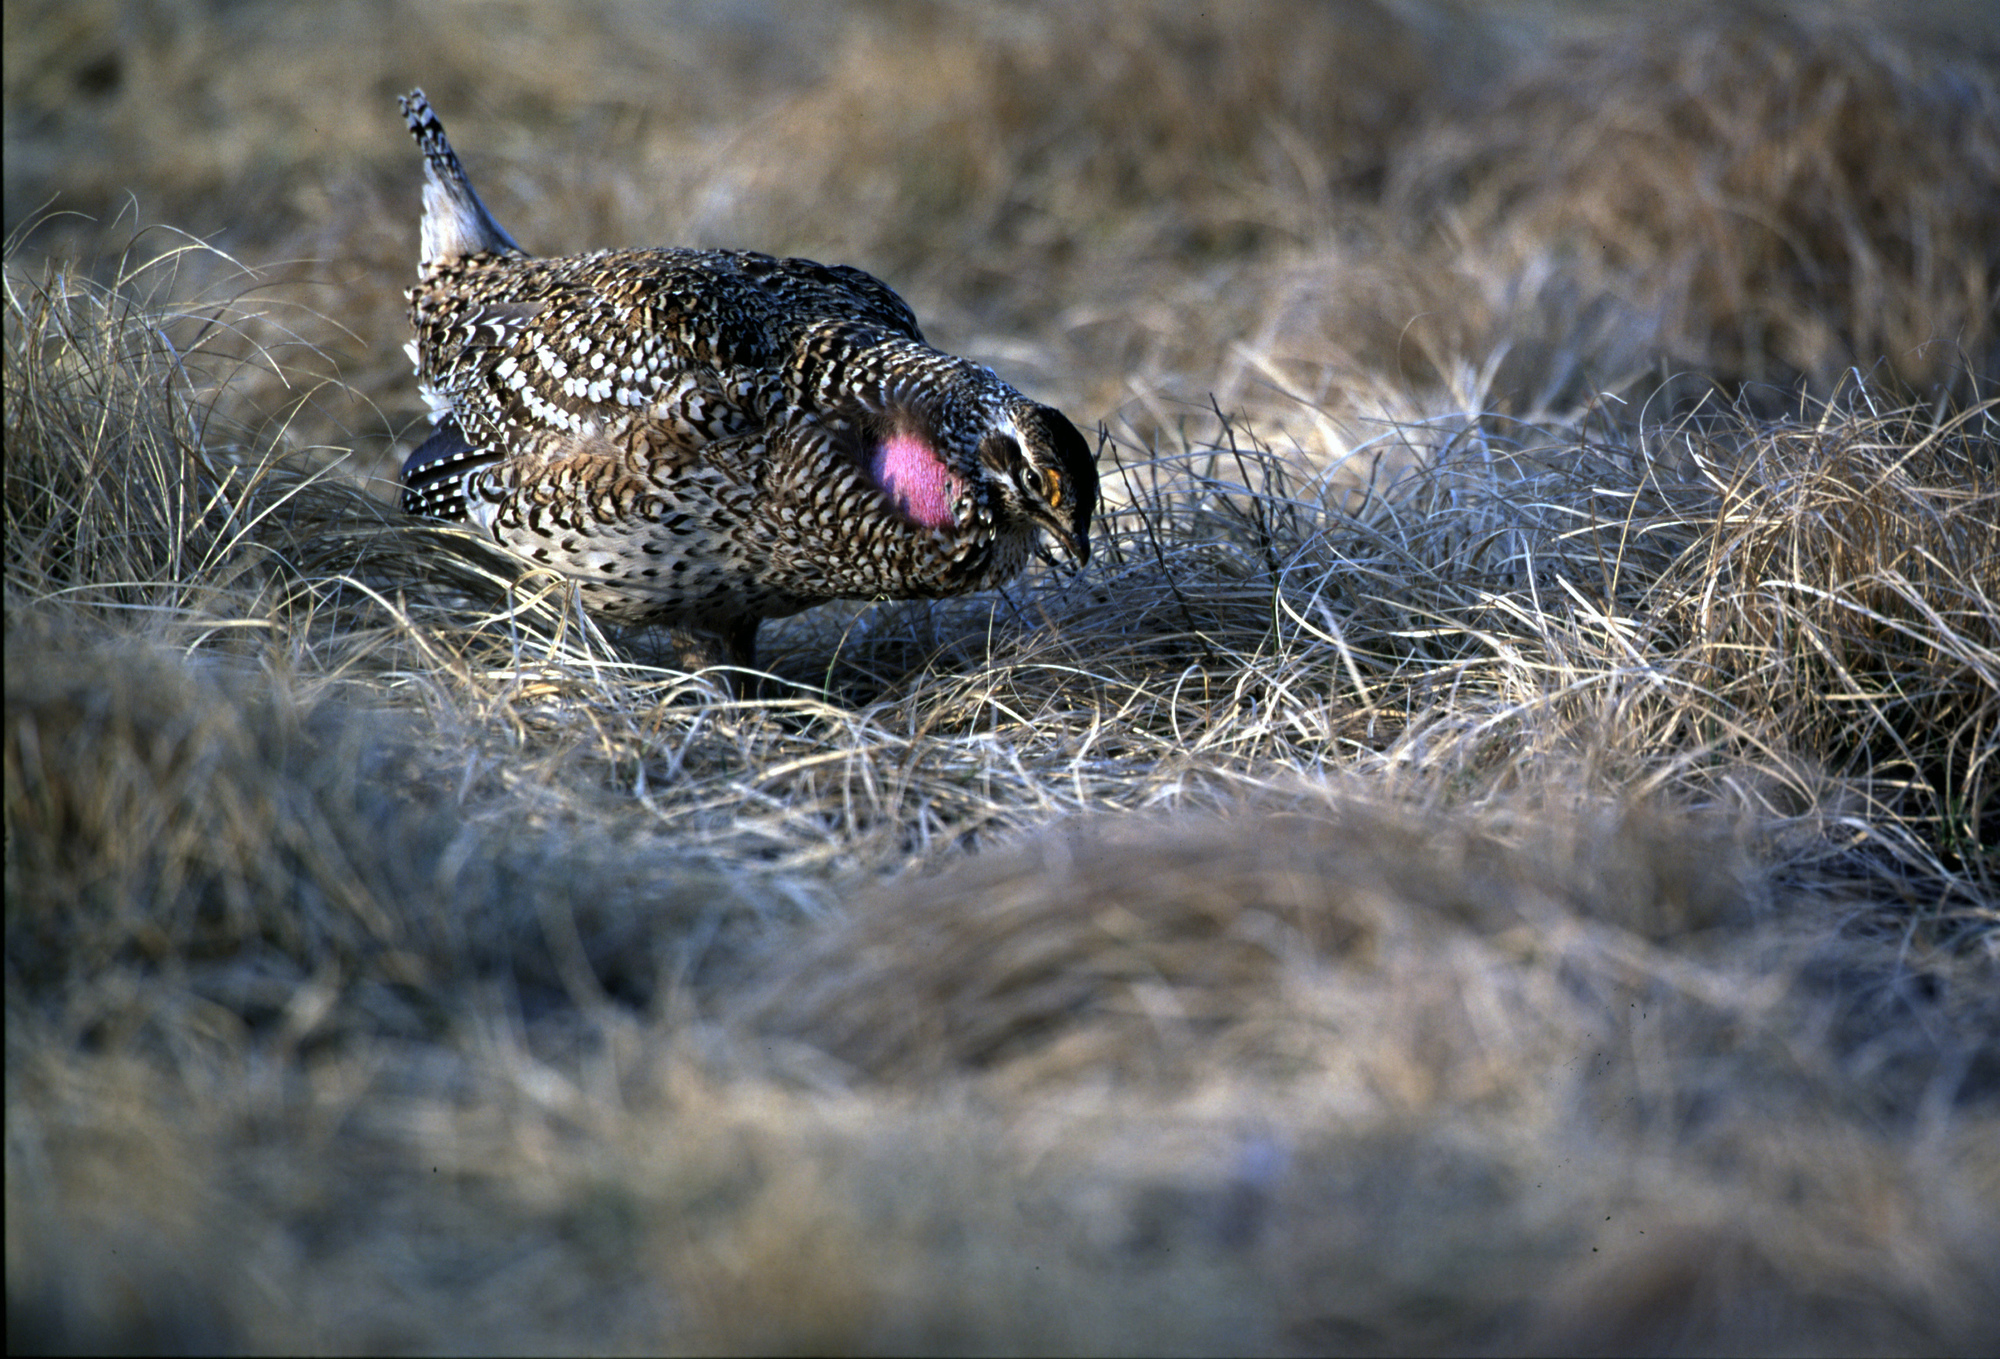 Sharp-tailed grouse are found in greatest concentrations in the Upper Peninsula in Chippewa and Schoolcraft counties.